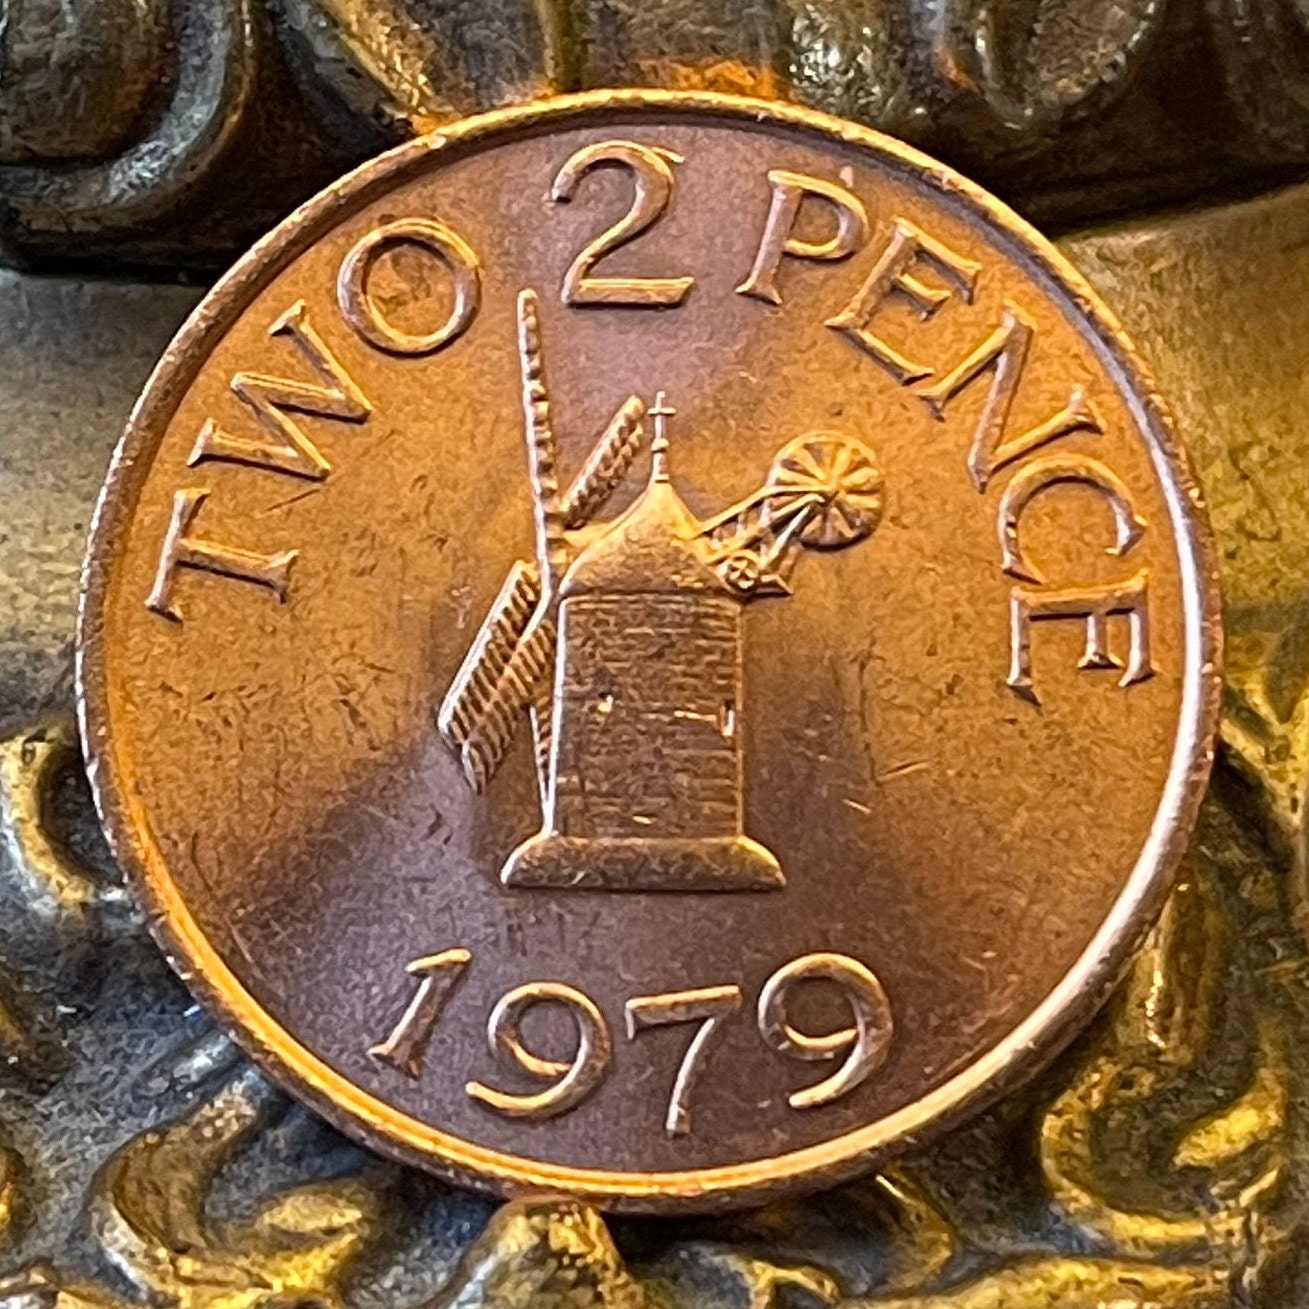 Sark Windmill 2 Pence Guernsey Authentic Coin Money for Jewelry and Craft Making